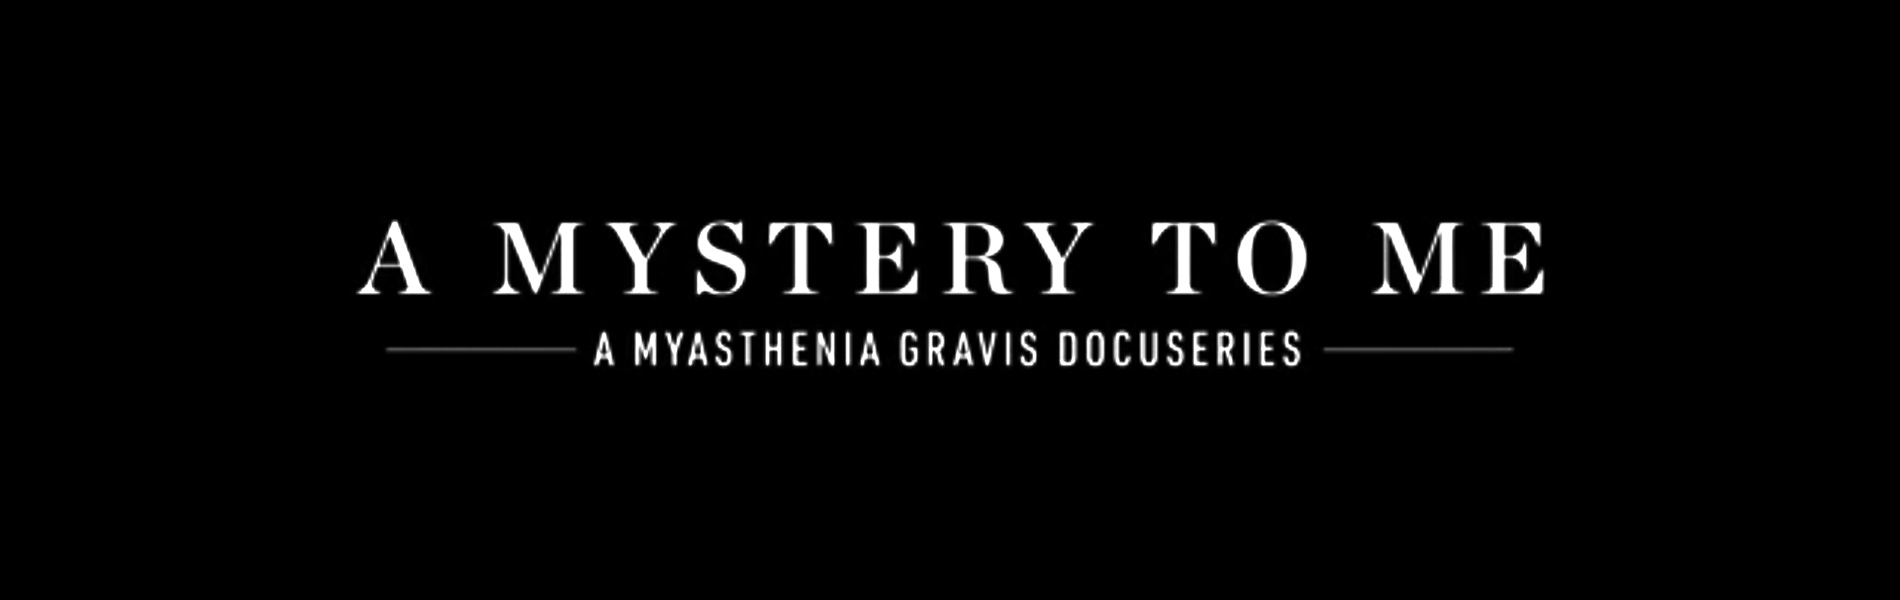 closerlook wins bronze Cannes Lion for myasthenia gravis documentary series, “A Mystery to Me”